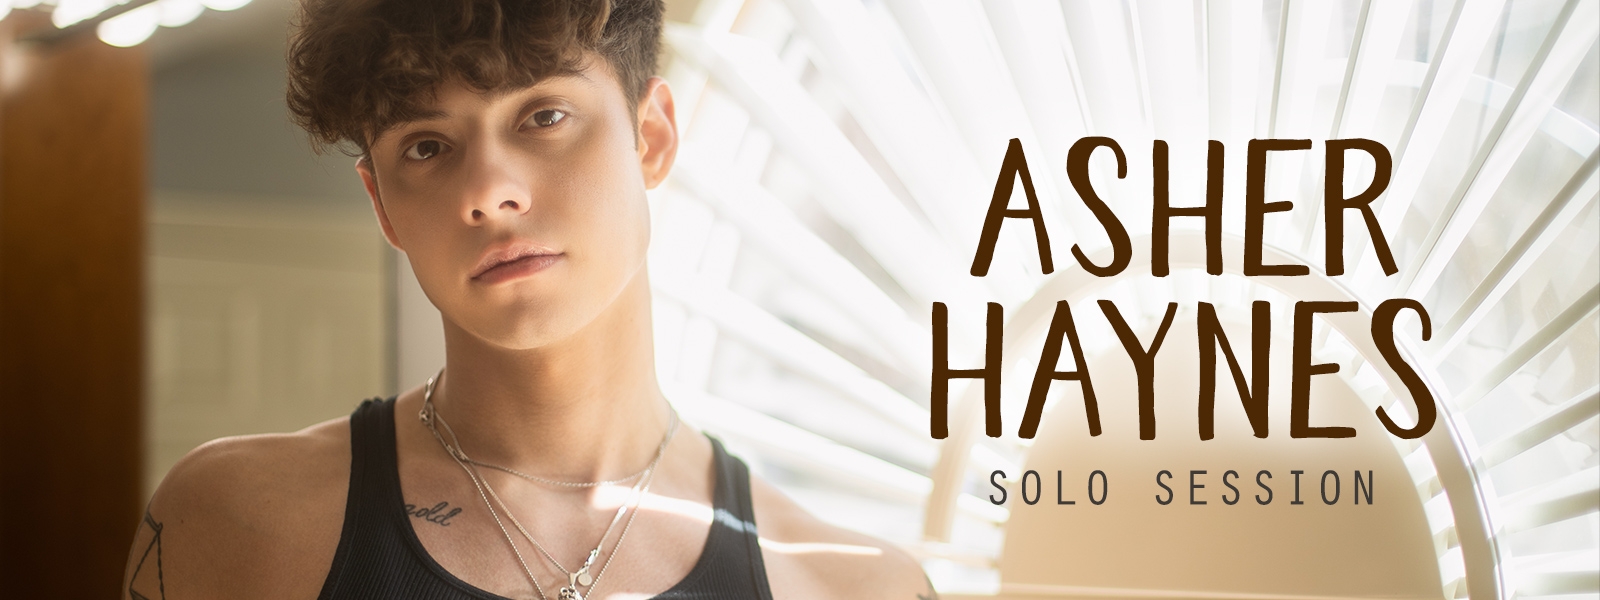 Asher Haynes Solo Session